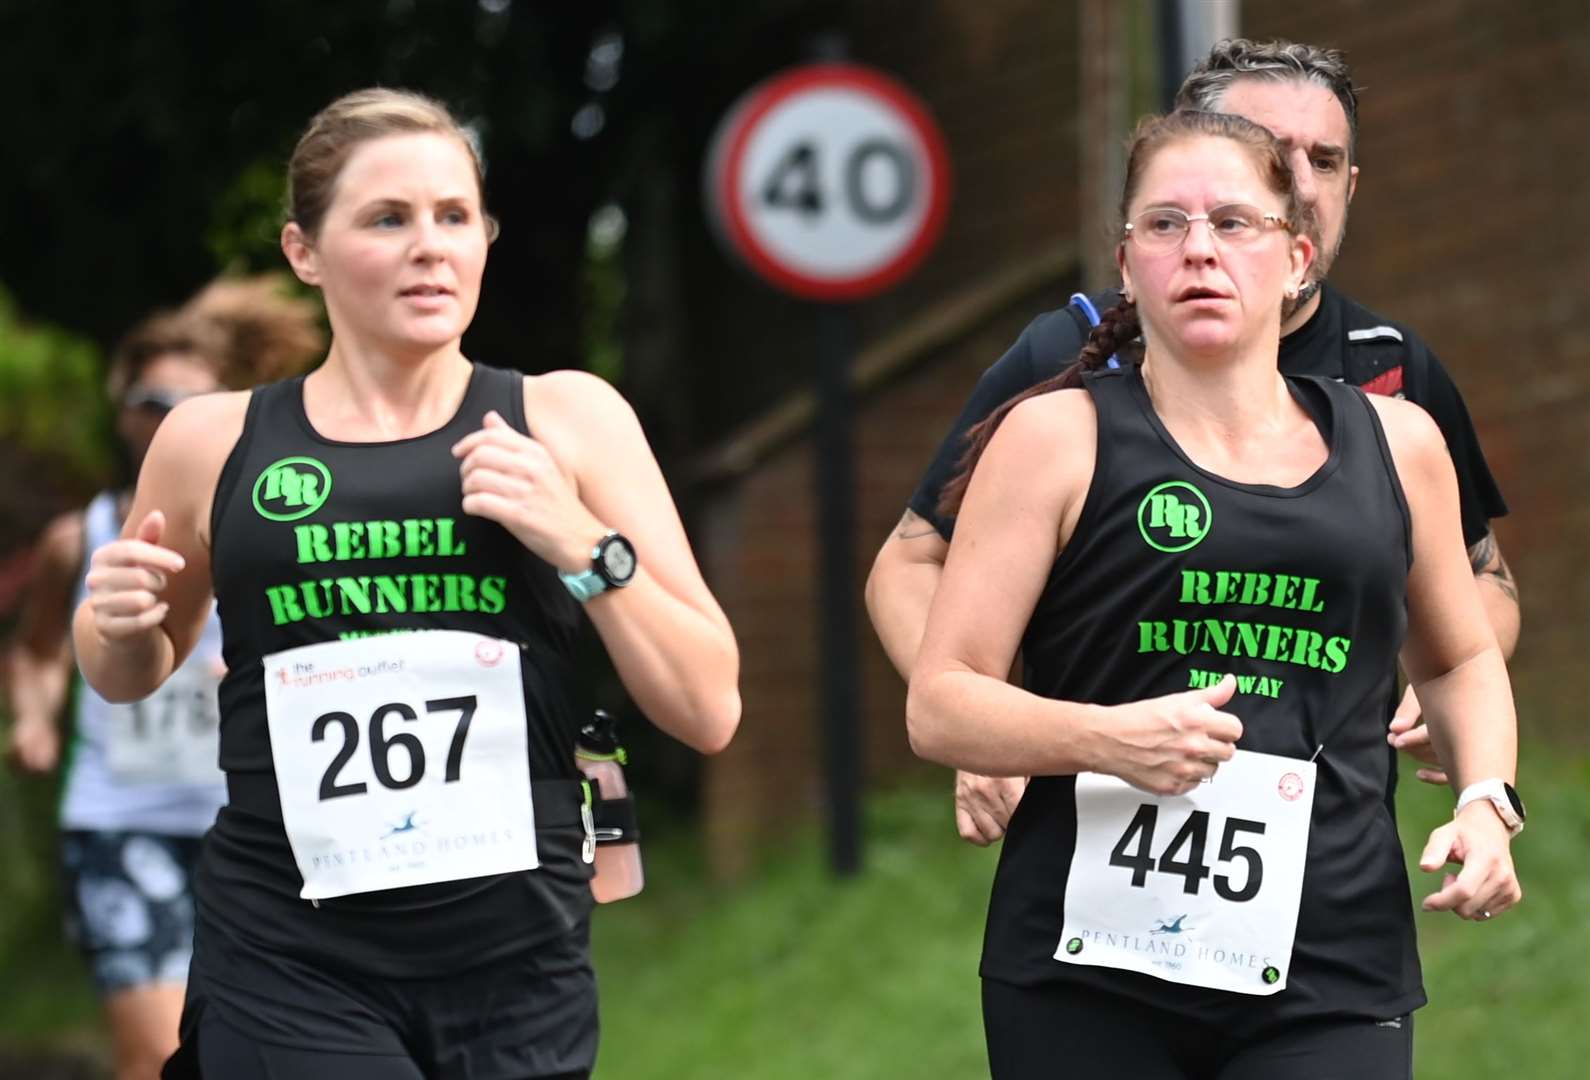 Rebel Runners Medway's Catherine Martin (267) and Michelle Waterman-Gay (445). Picture: Barry Goodwin (49789808)